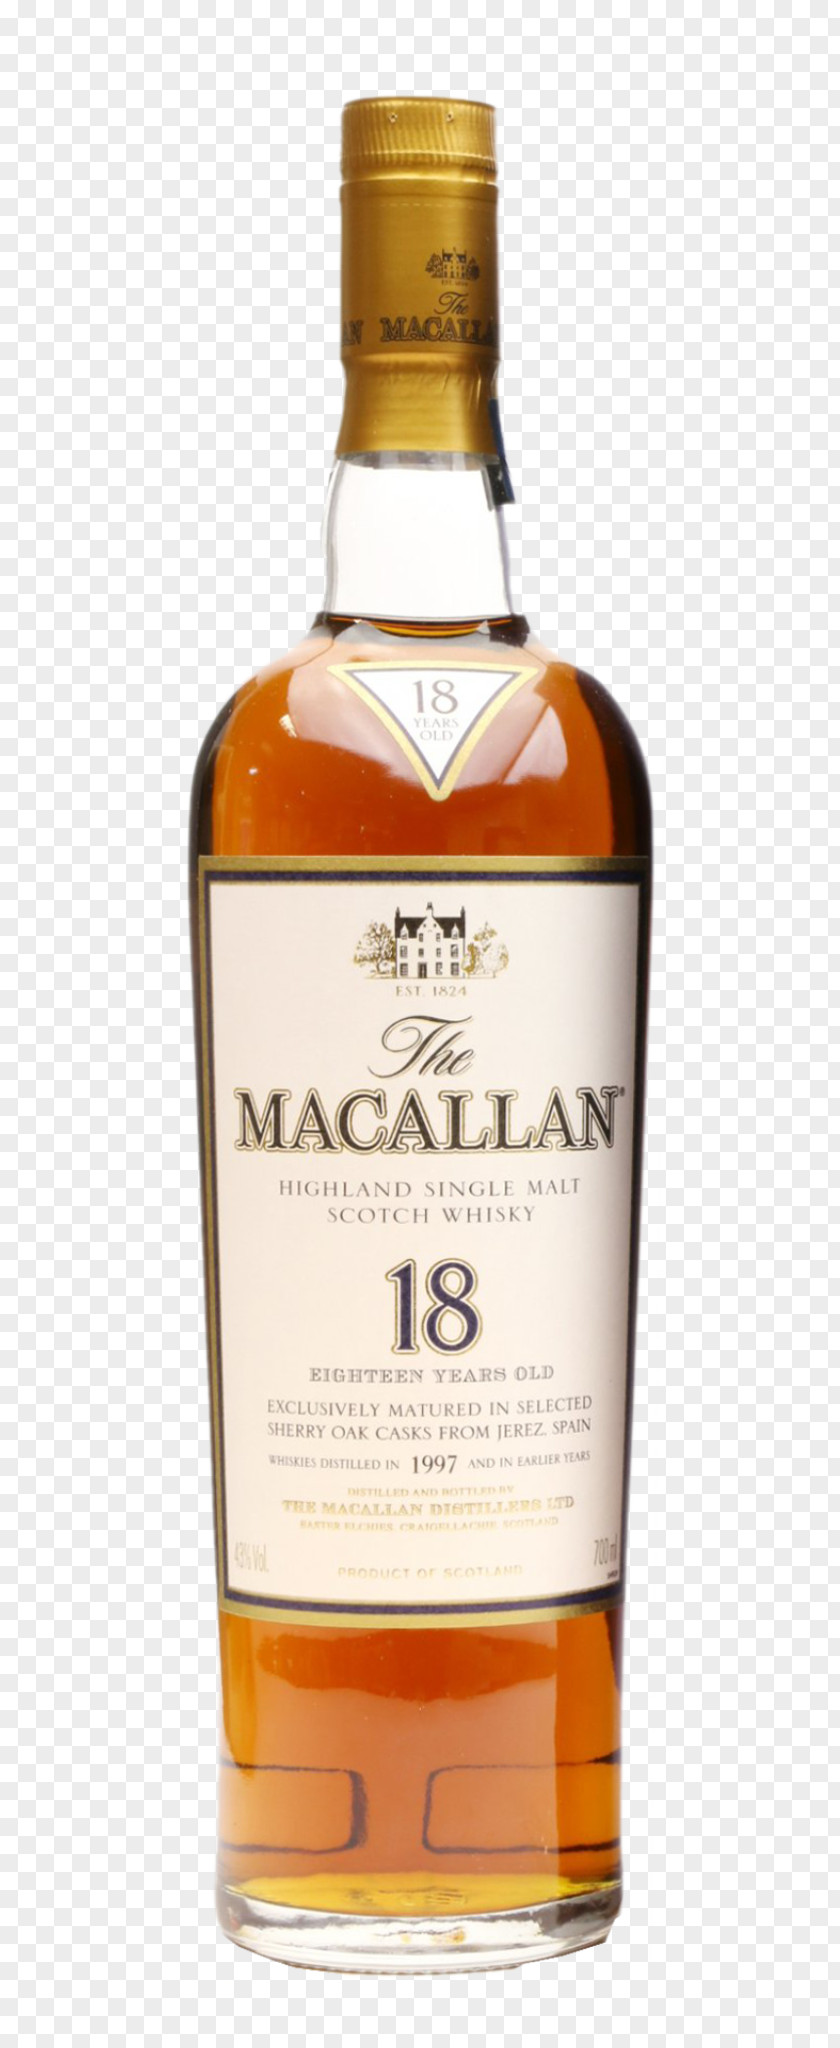 18 Years Old Scotch Whisky The Macallan Distillery Whiskey Distilled Beverage Cutty Sark PNG